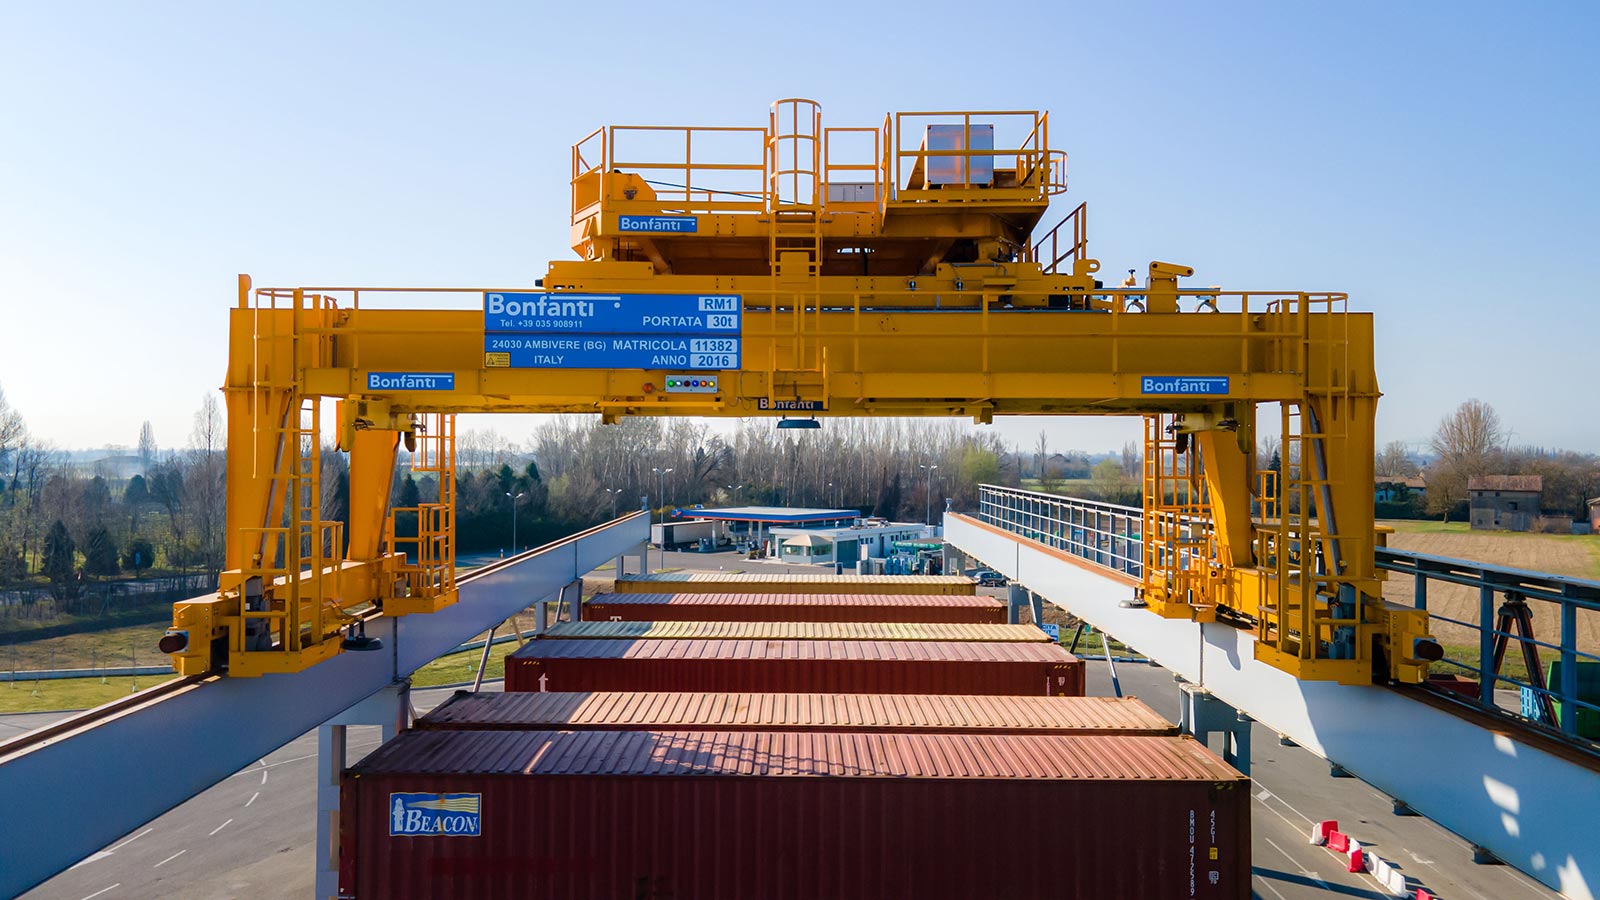 BONFANTI container handling and storage lifting equipment